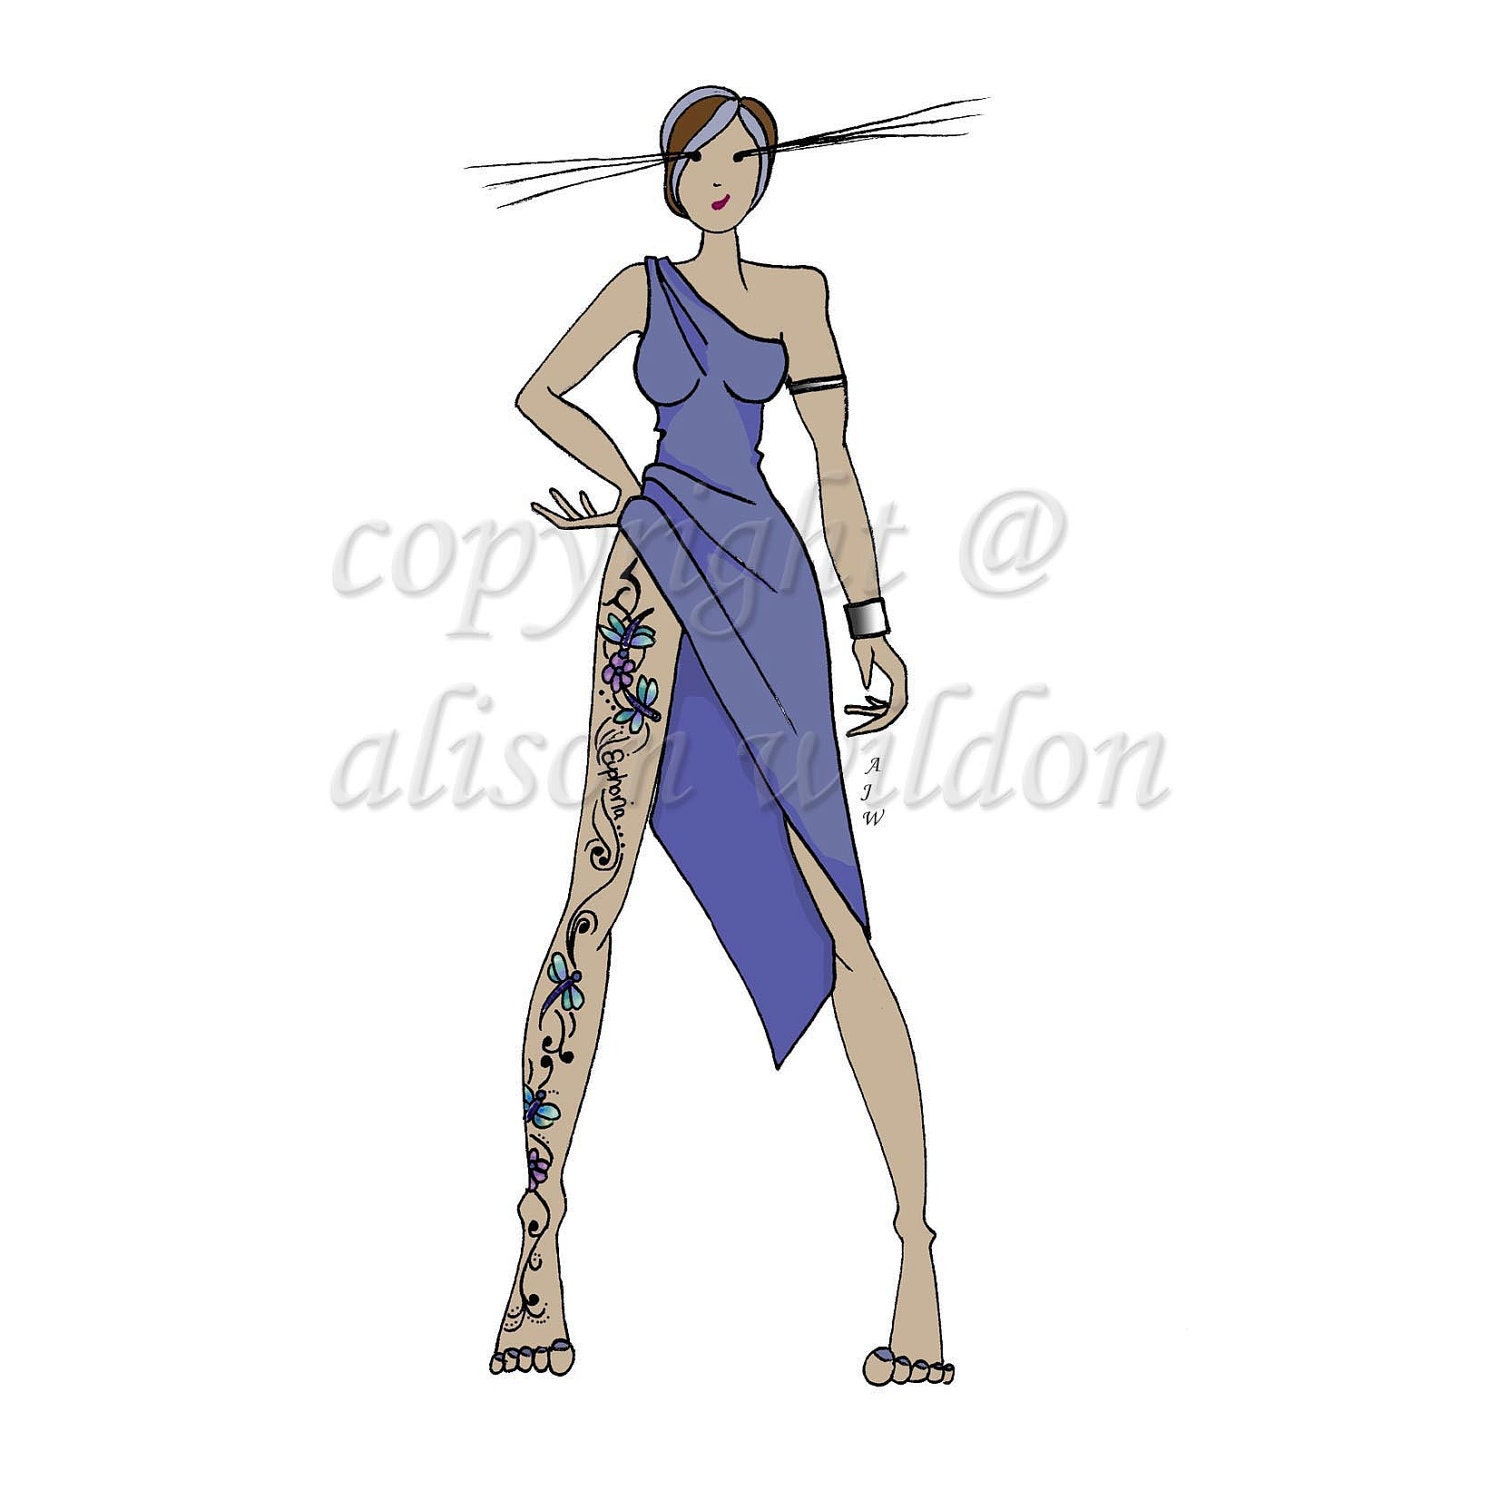 Illustration of Lady Euphoria, in a purple dress with detailed leg tattoo.